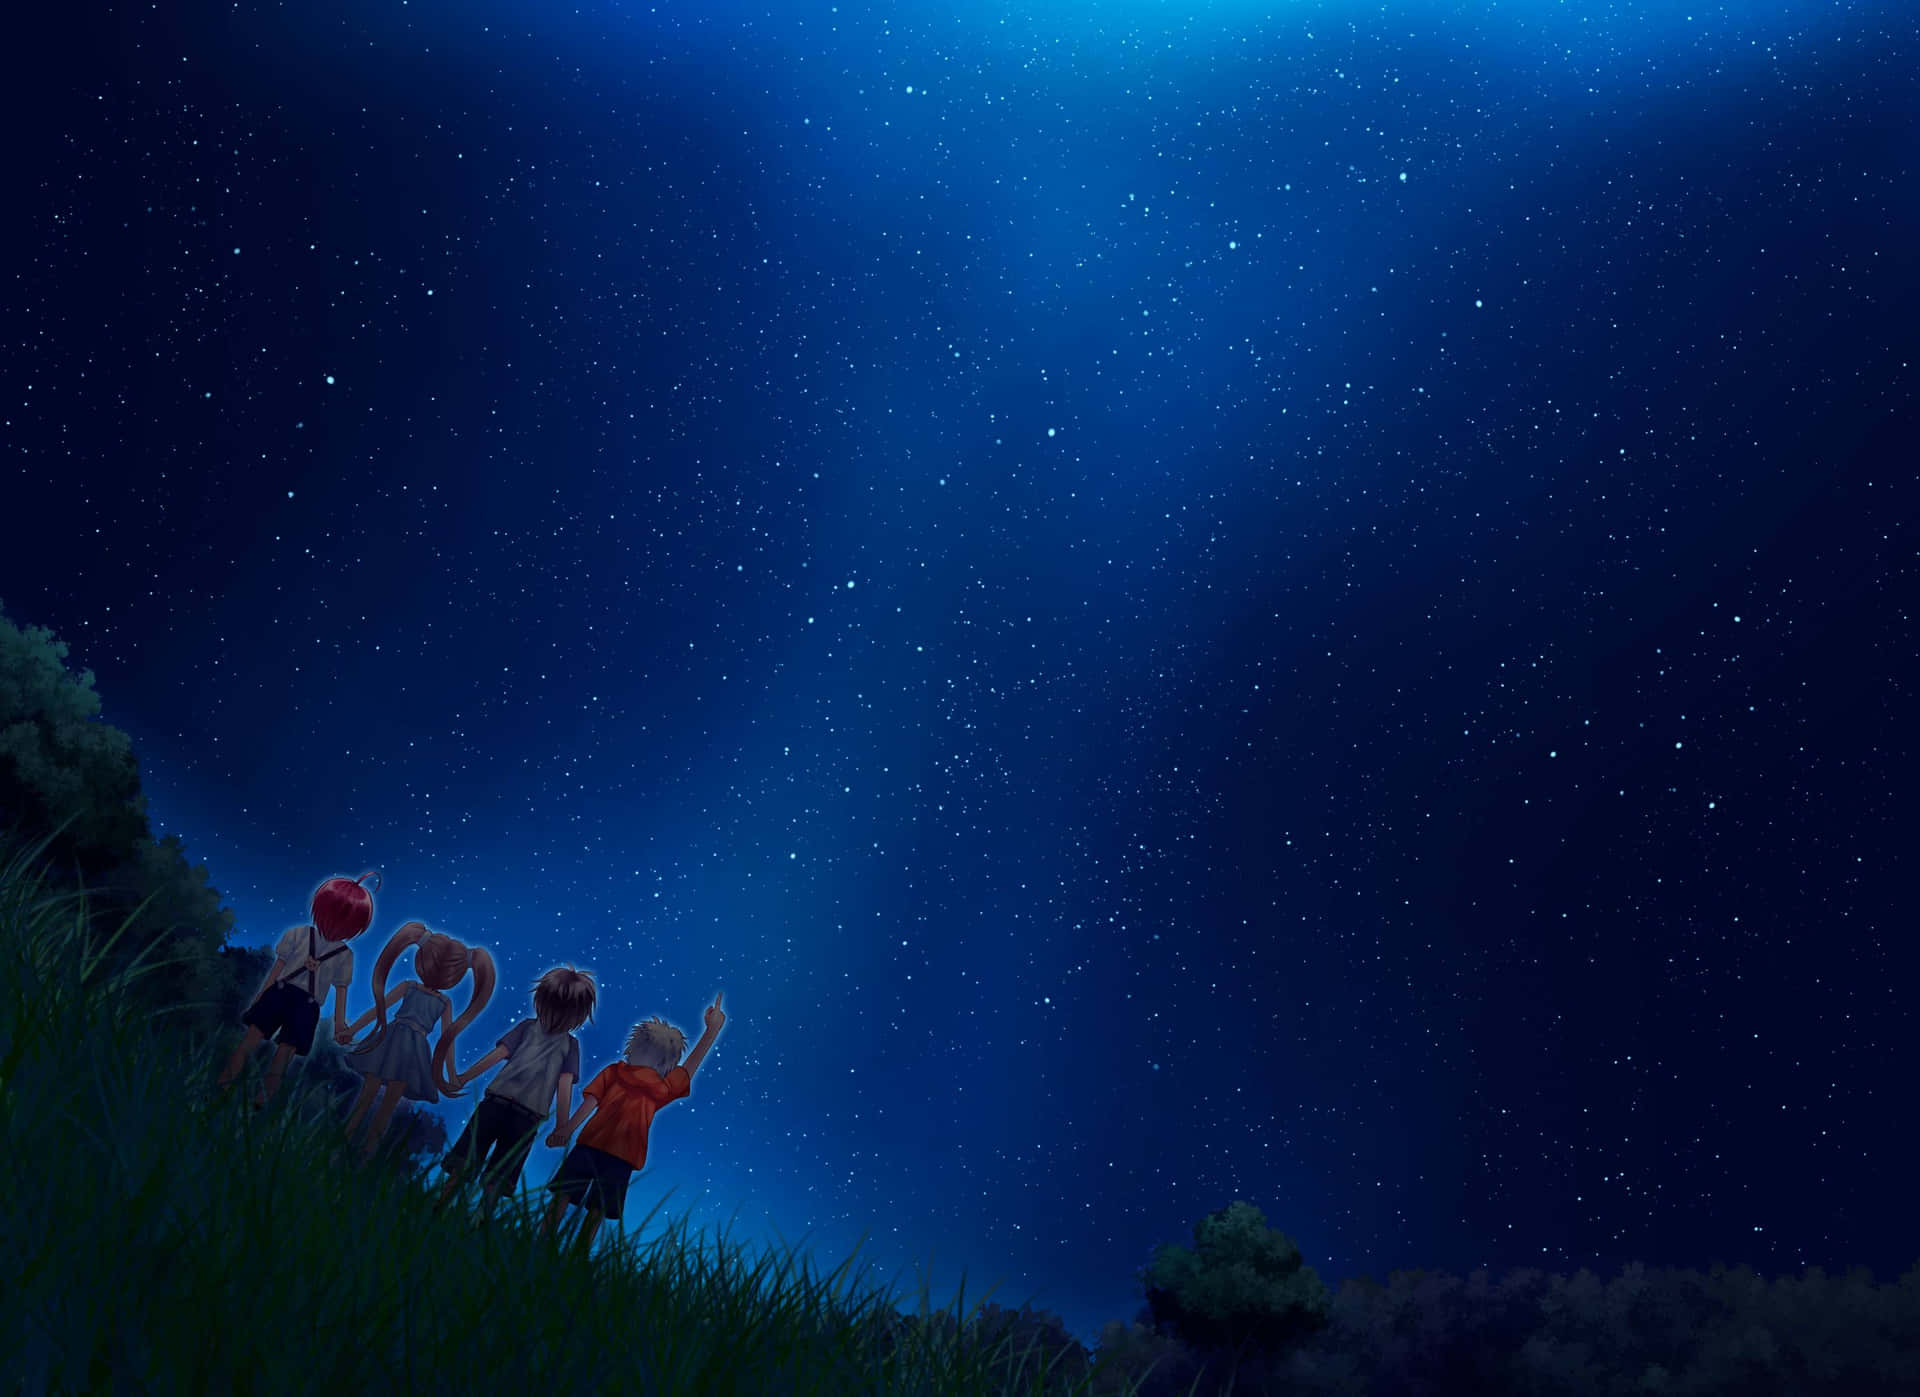 A peaceful chilly night under a starlit sky Wallpaper